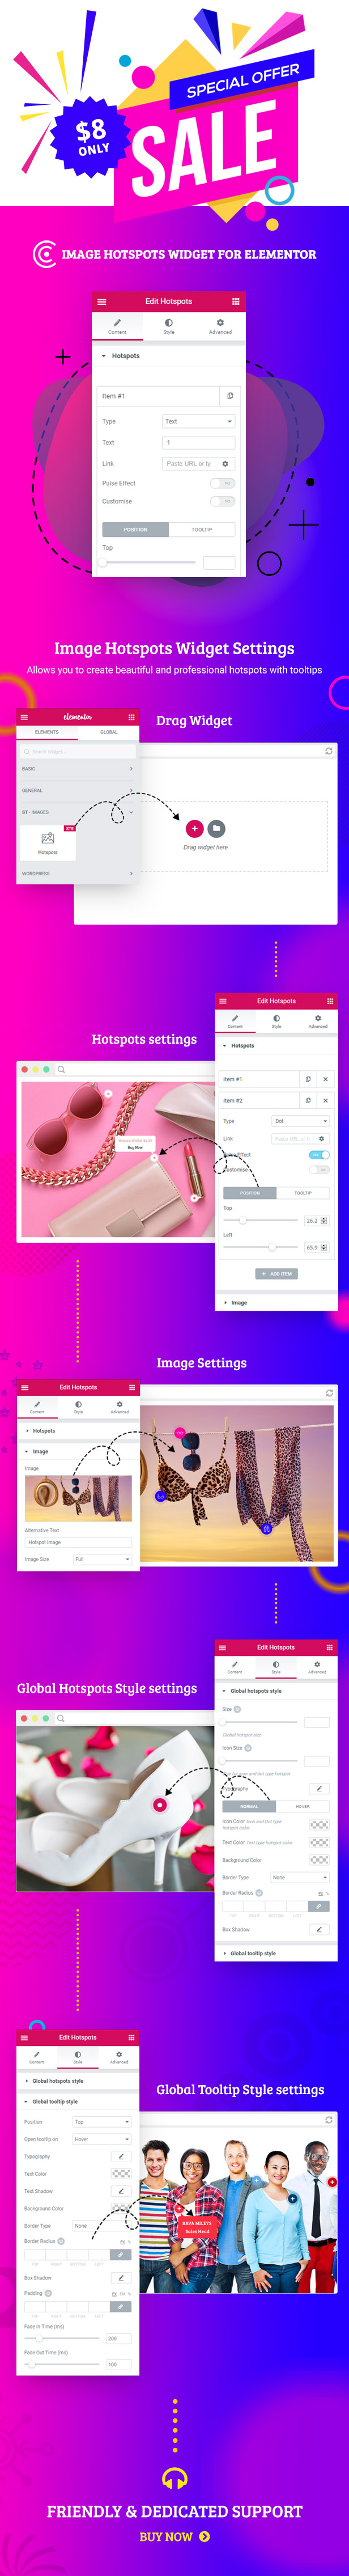 Image Hotspots Widgets by SThemes for Elementor Page builder